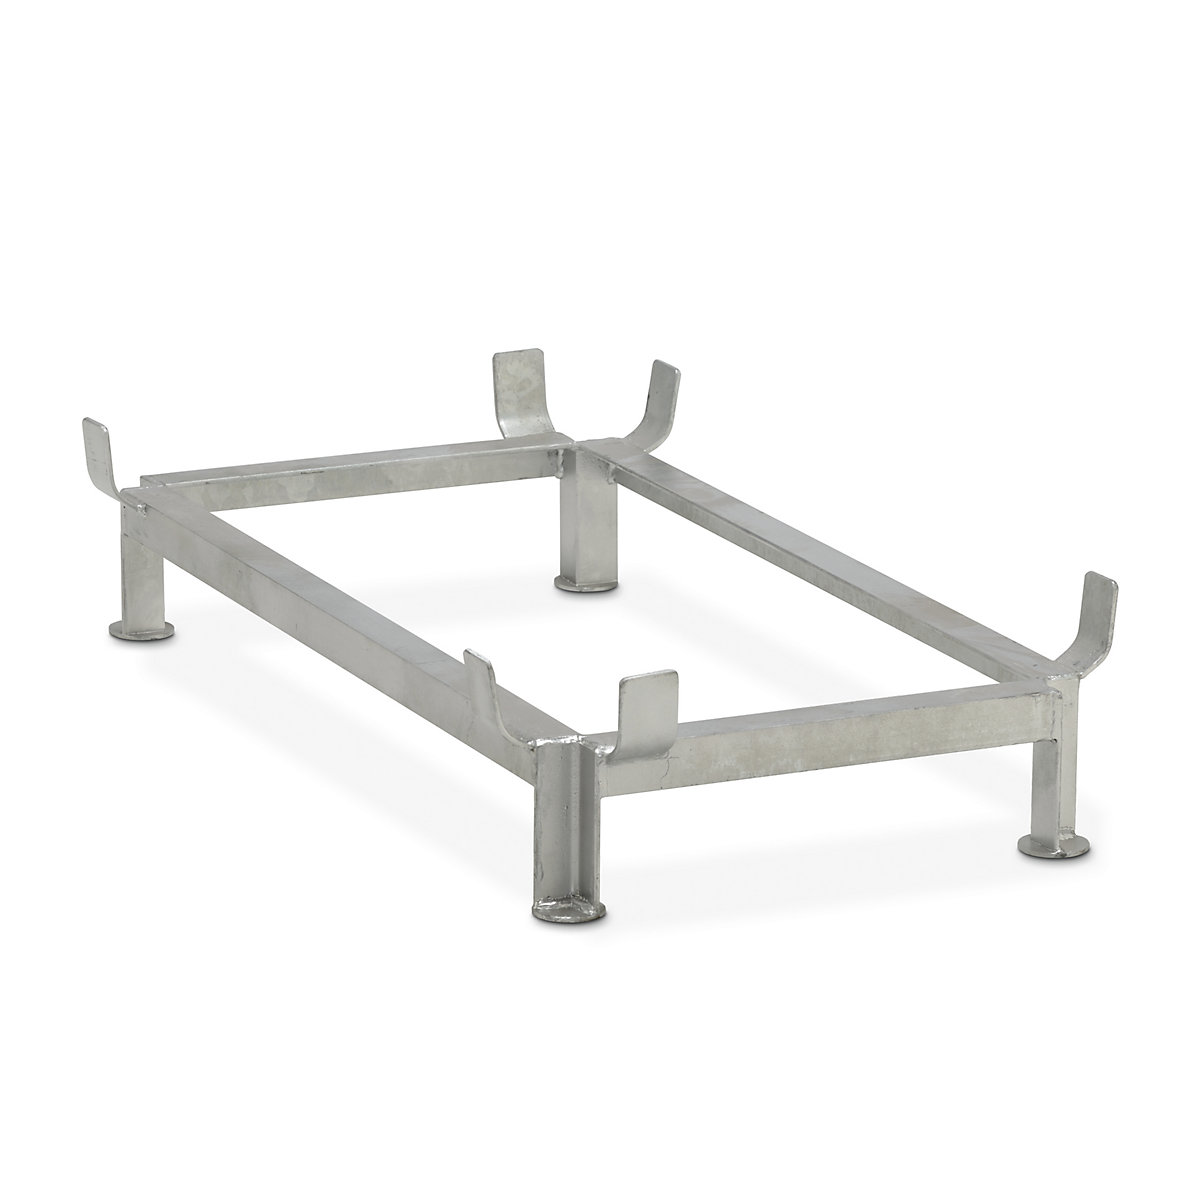 Steel base frame – CEMO, zinc plated, for LxW 1170 x 690 mm, capacity 300 litres